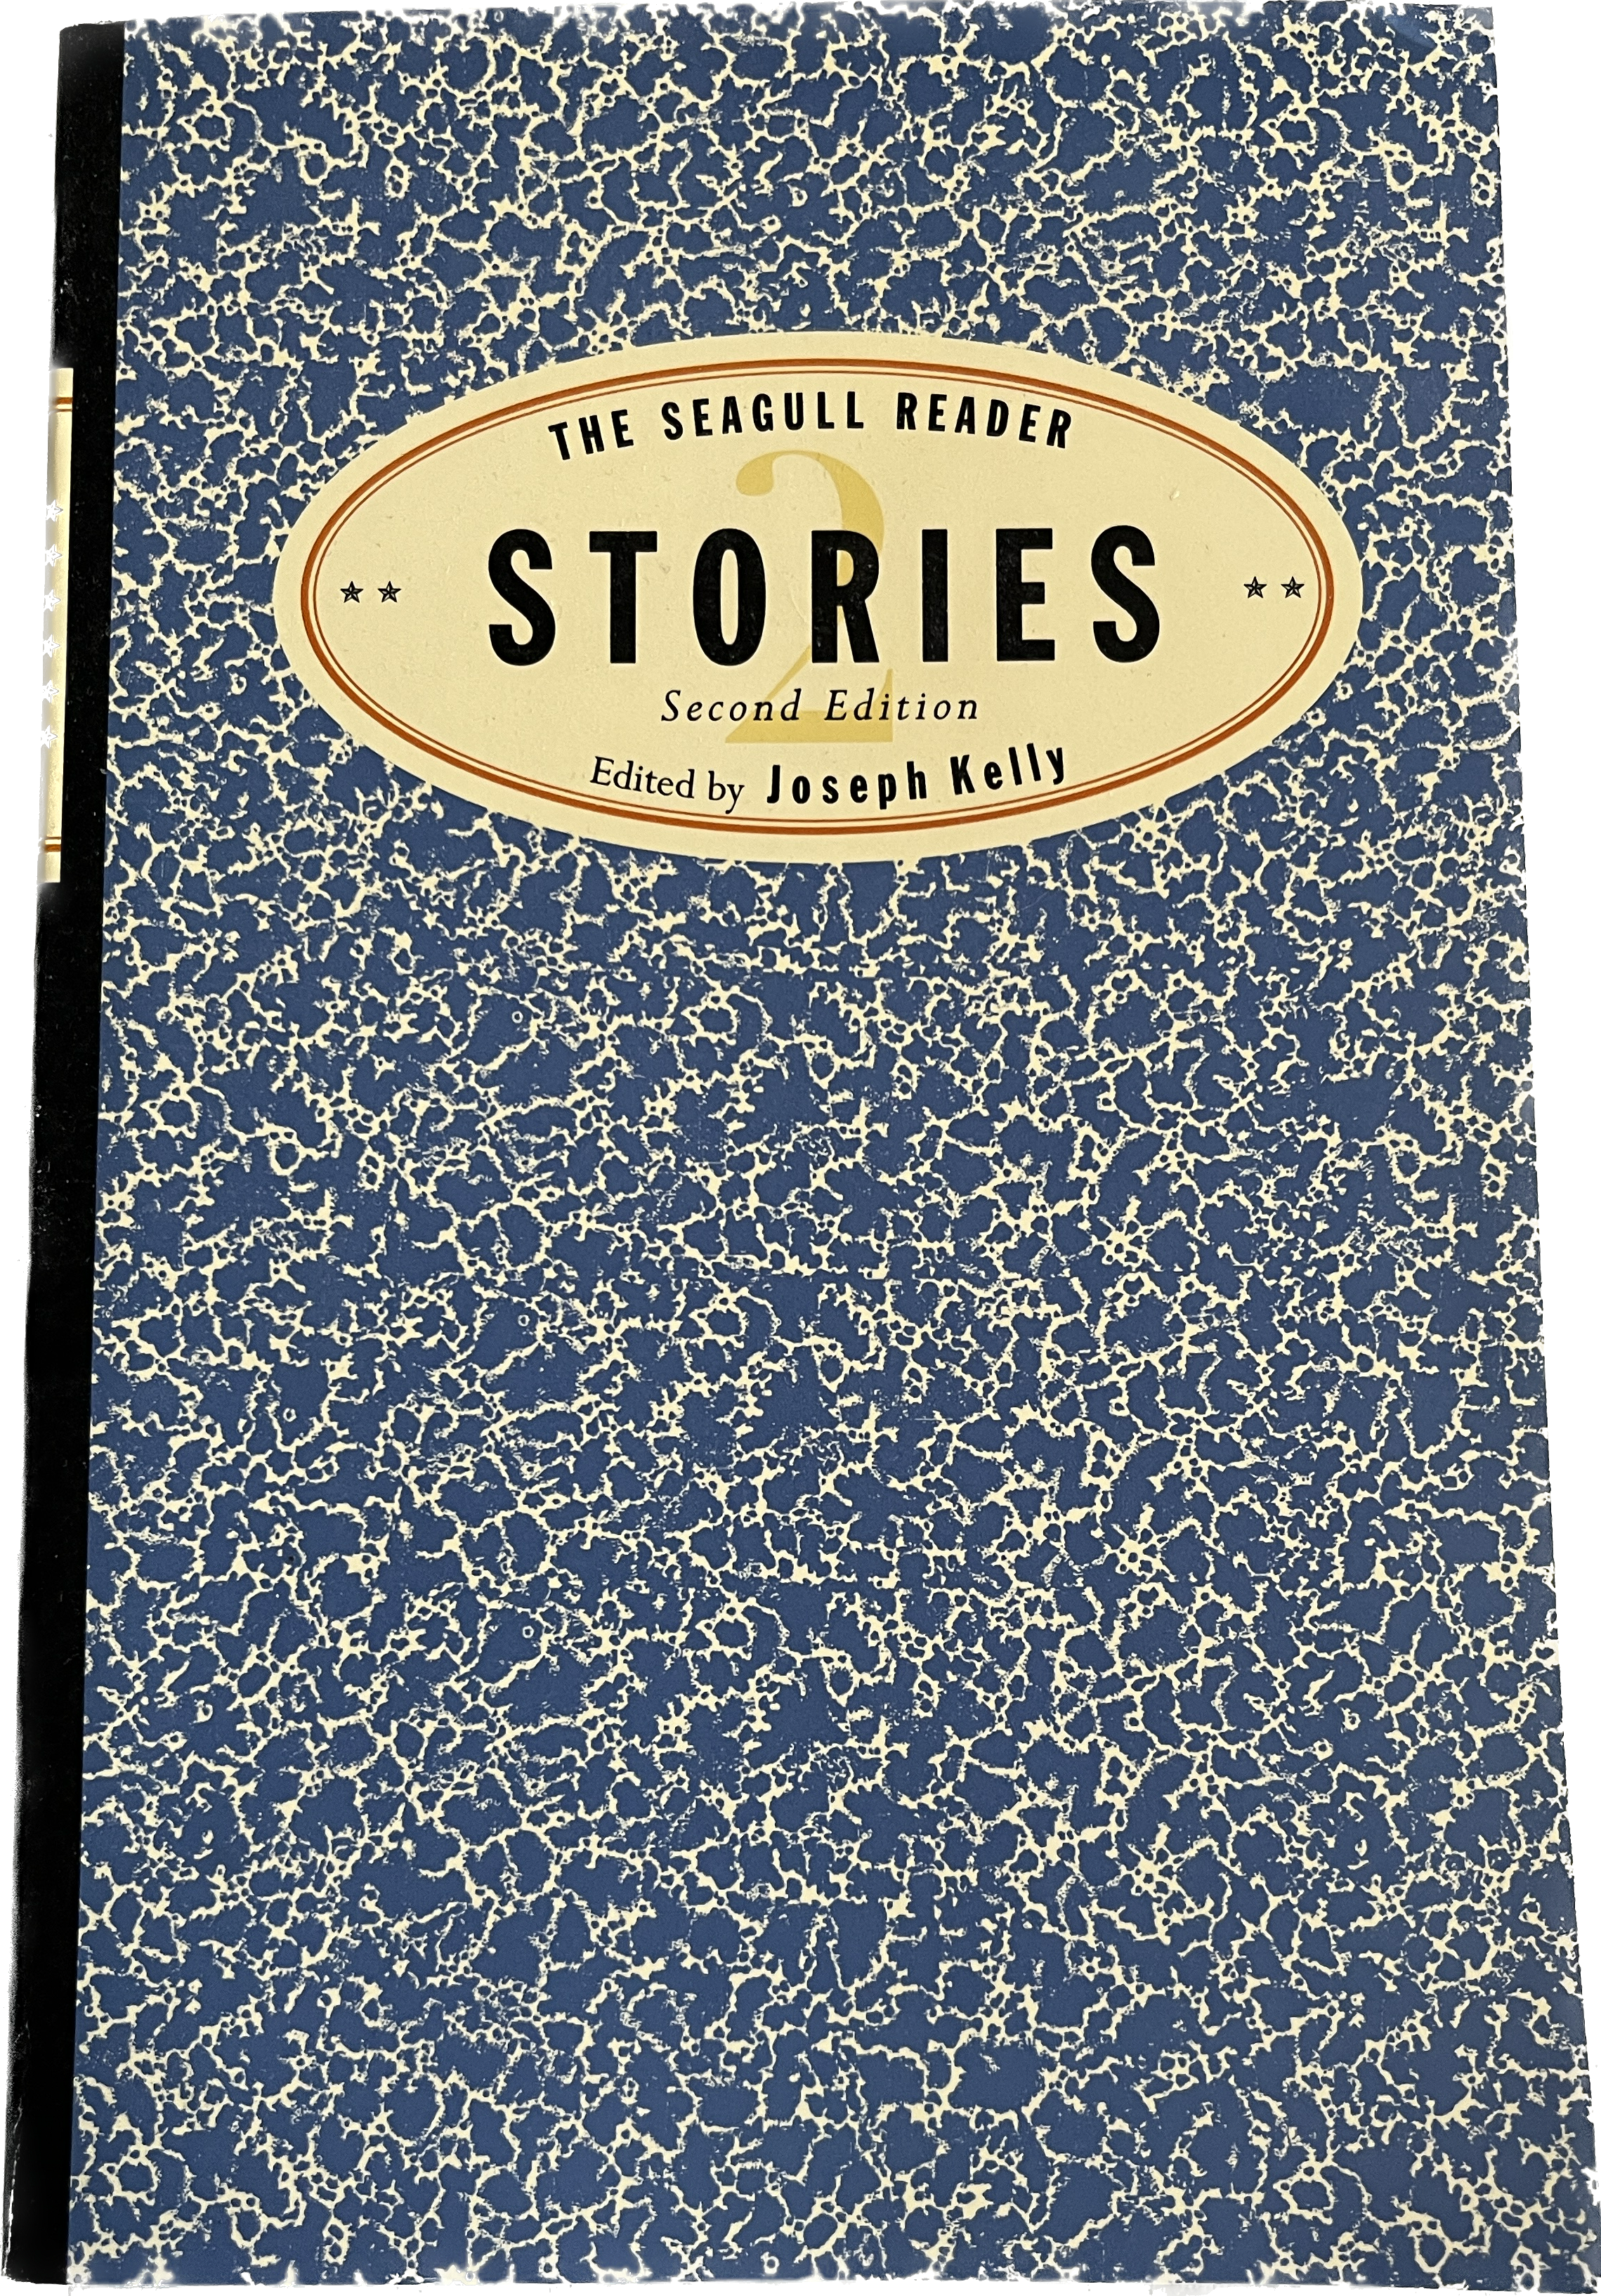 the seagull reader stories, second edition, edited by joseph kelly